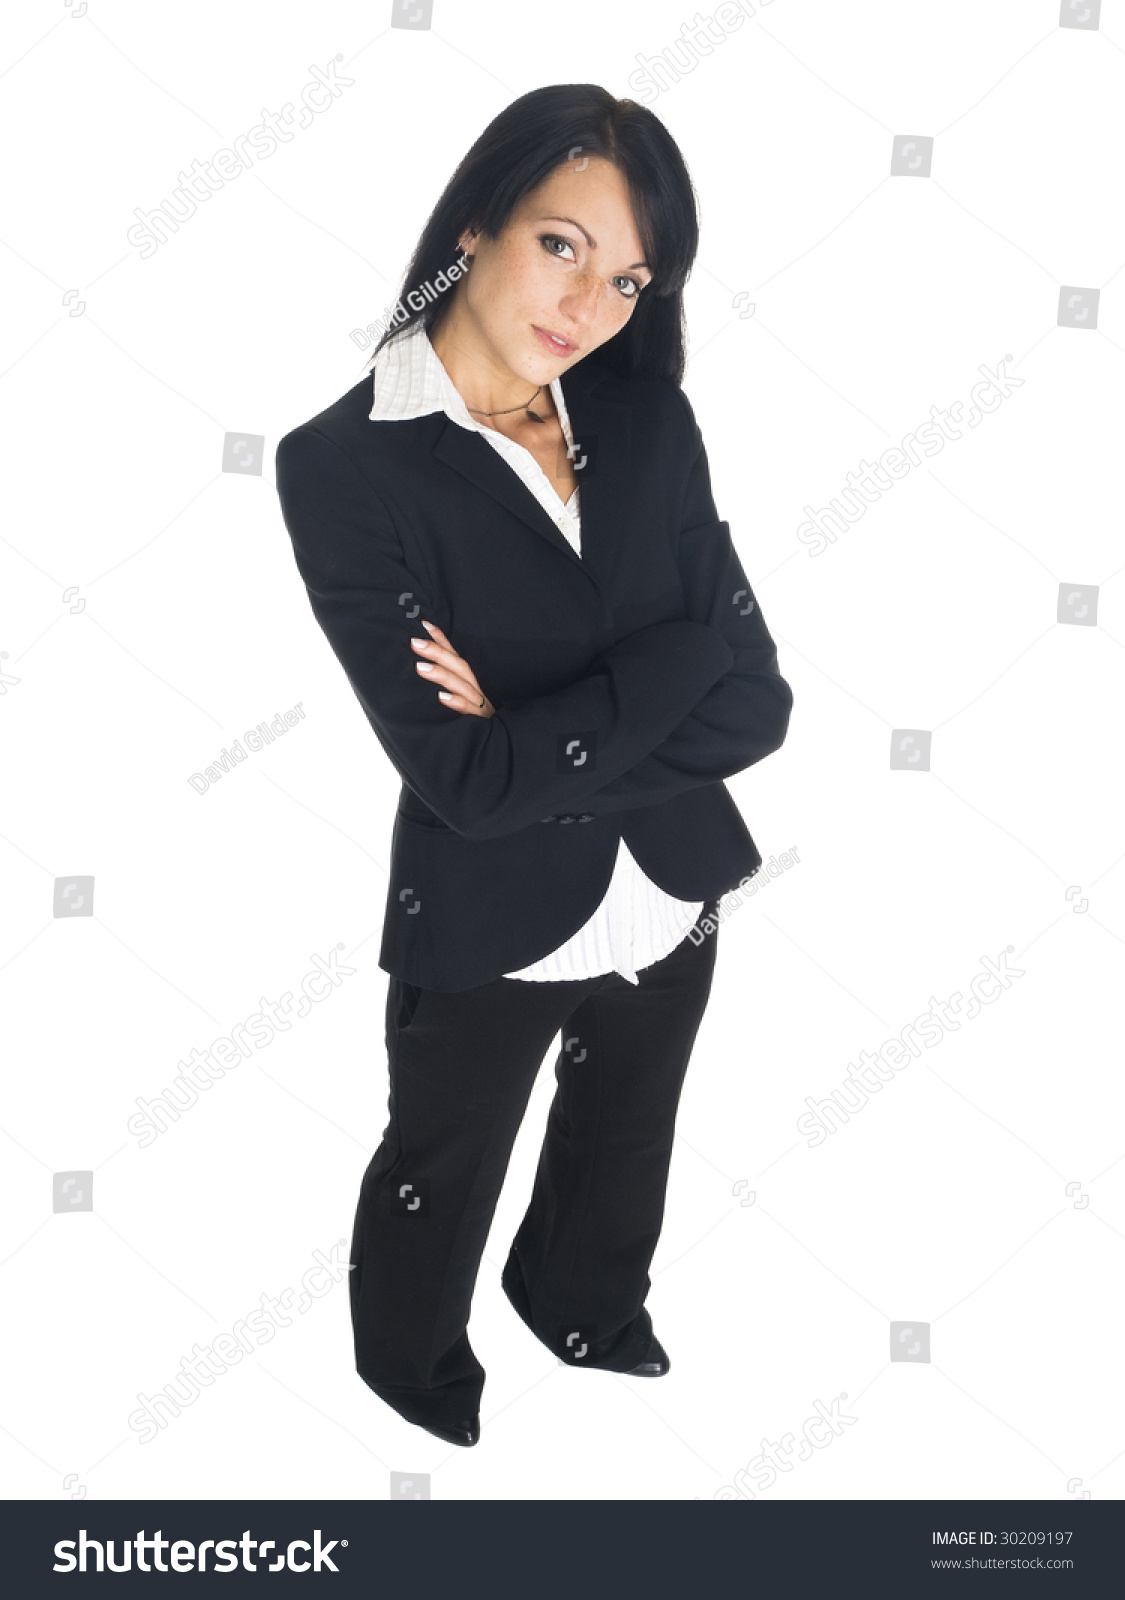 High Angle Isolated Studio Shot Of A Businesswoman Looking Up At The ...